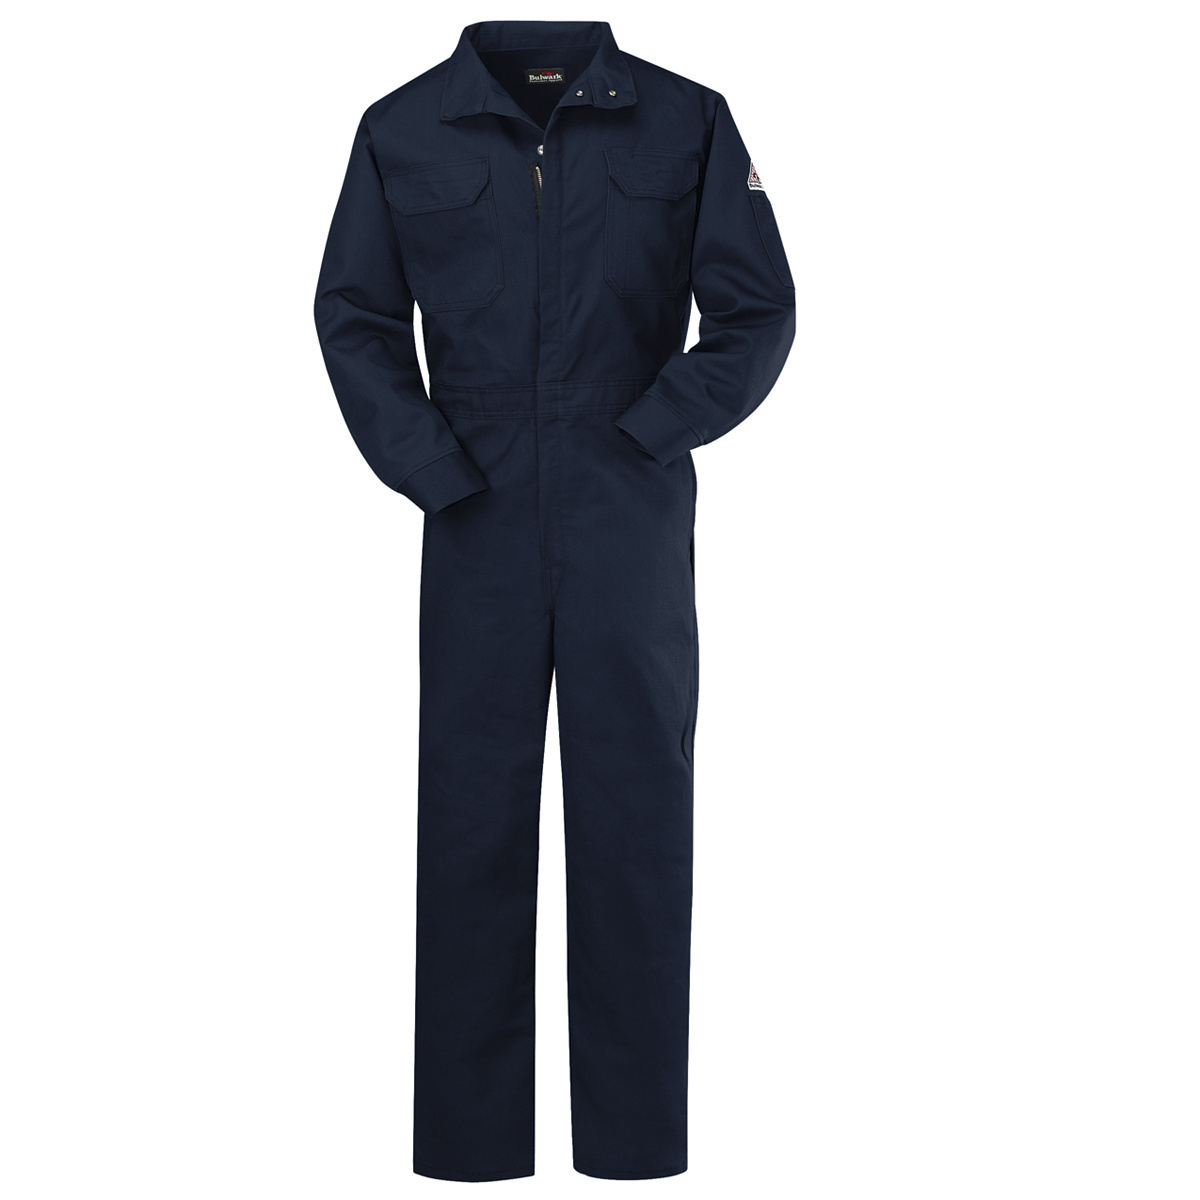 Bulwark® 54 Regular Navy Blue Westex Ultrasoft®/Cotton/Nylon Flame Resistant Coveralls With Zipper Front Closure